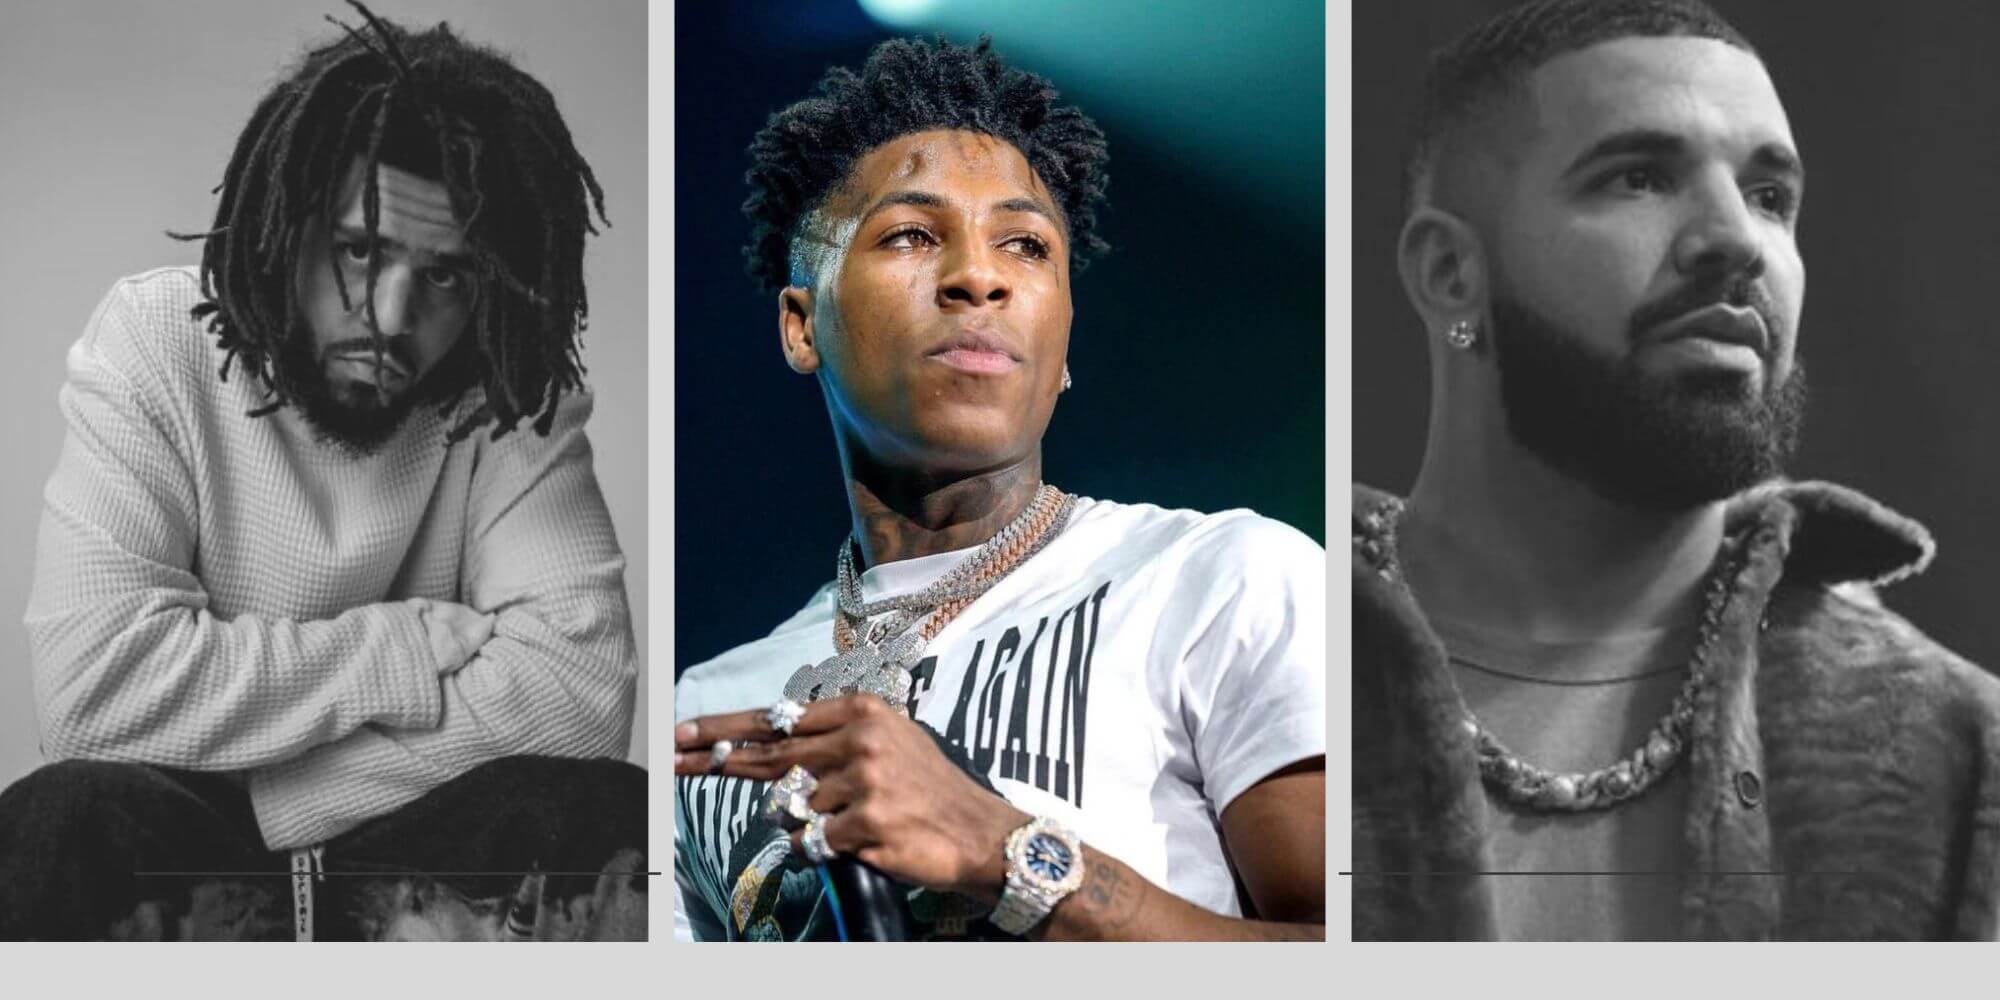 Nba YoungBoy disses Drake and J. Cole